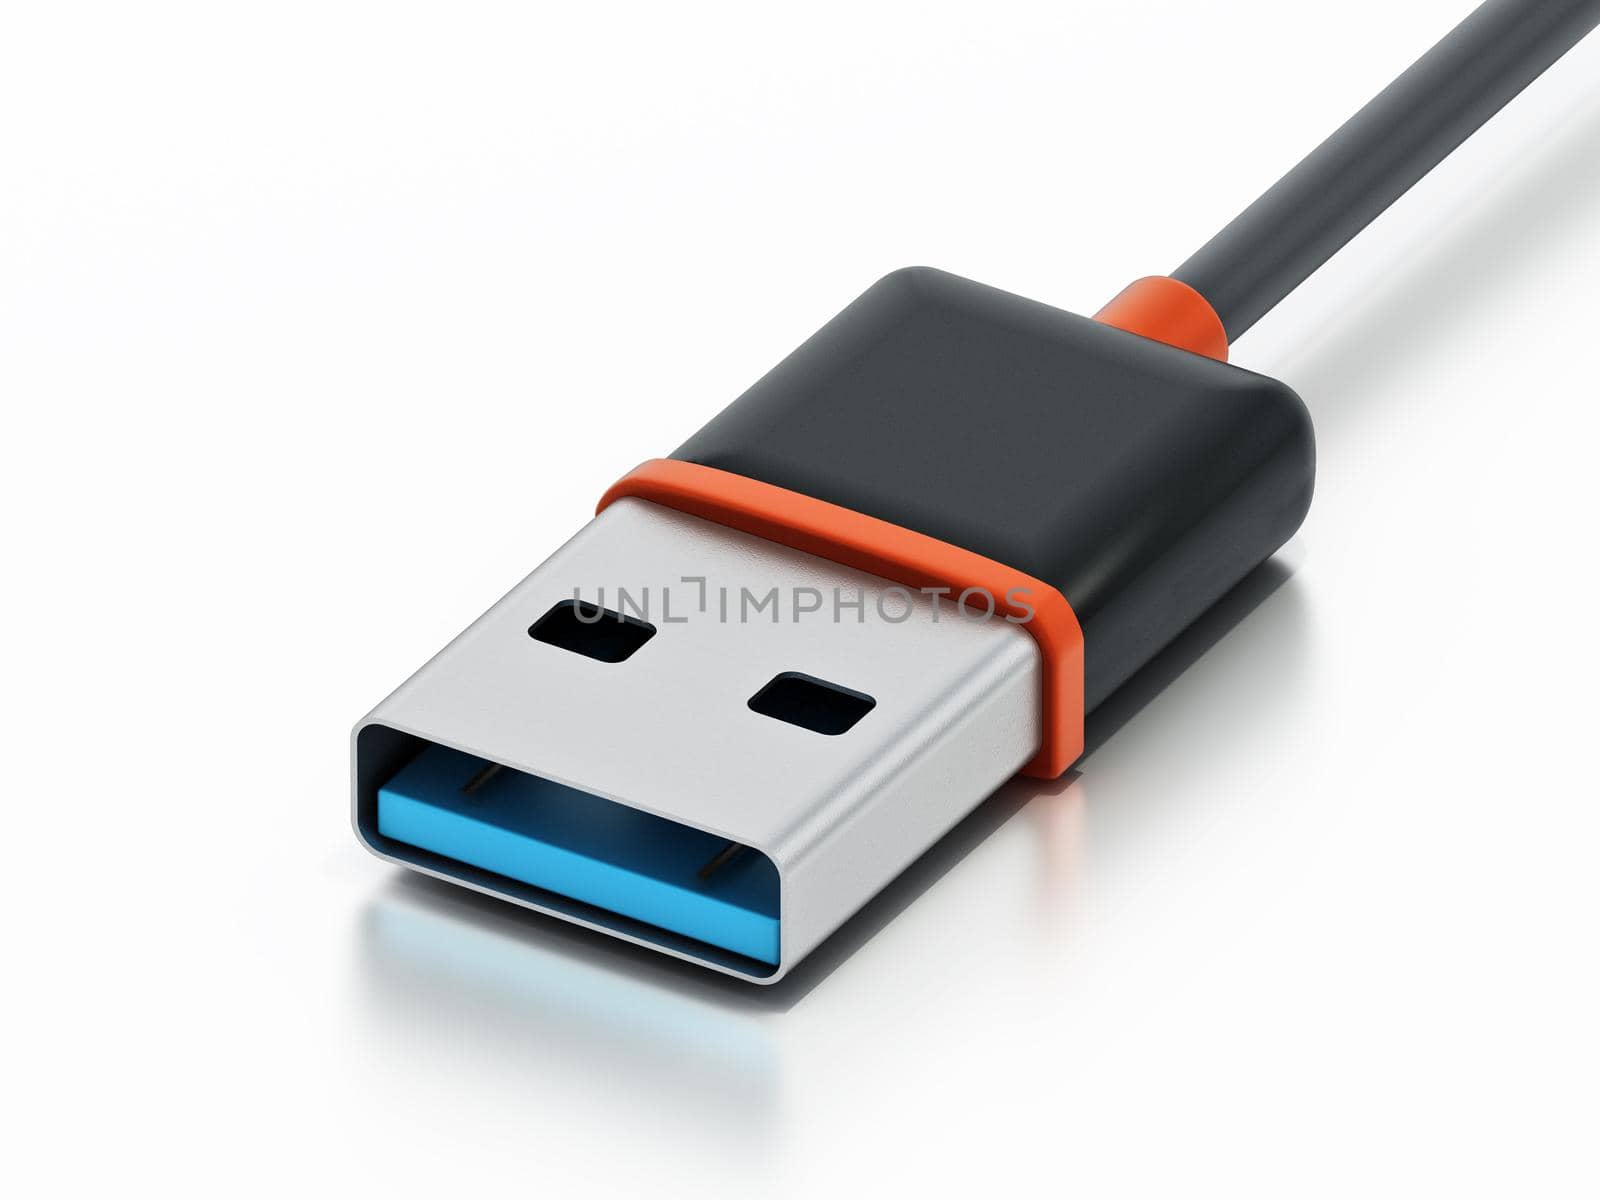 USB cable and plug isolated on white background. 3D illustration.